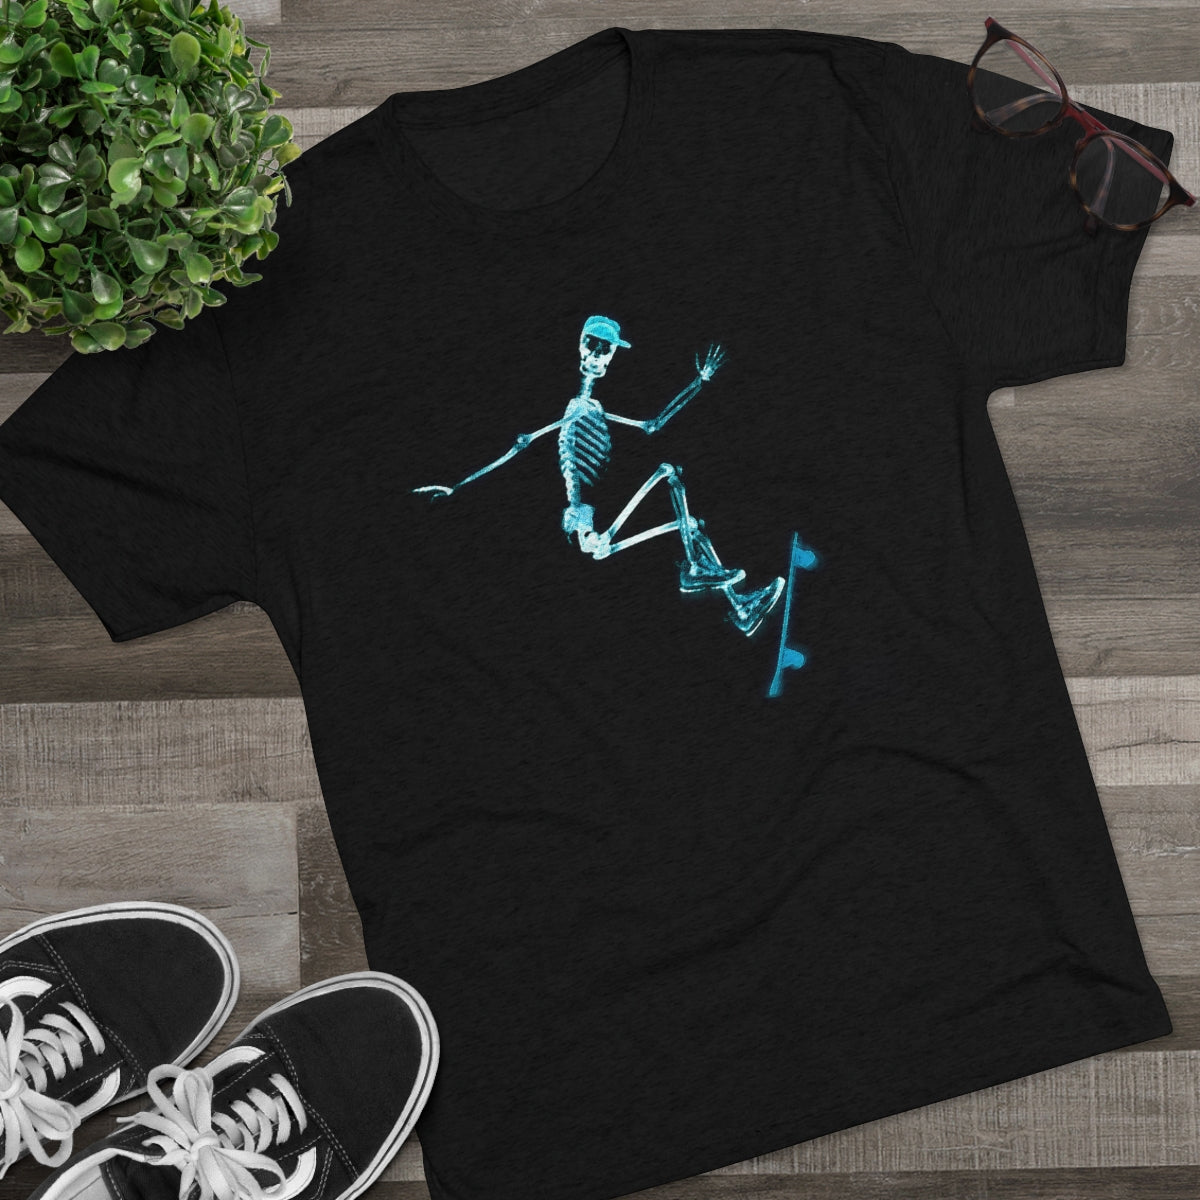 Special Collection – X-Ray: Ollie – Unisex Tri-Blend Crew Tee